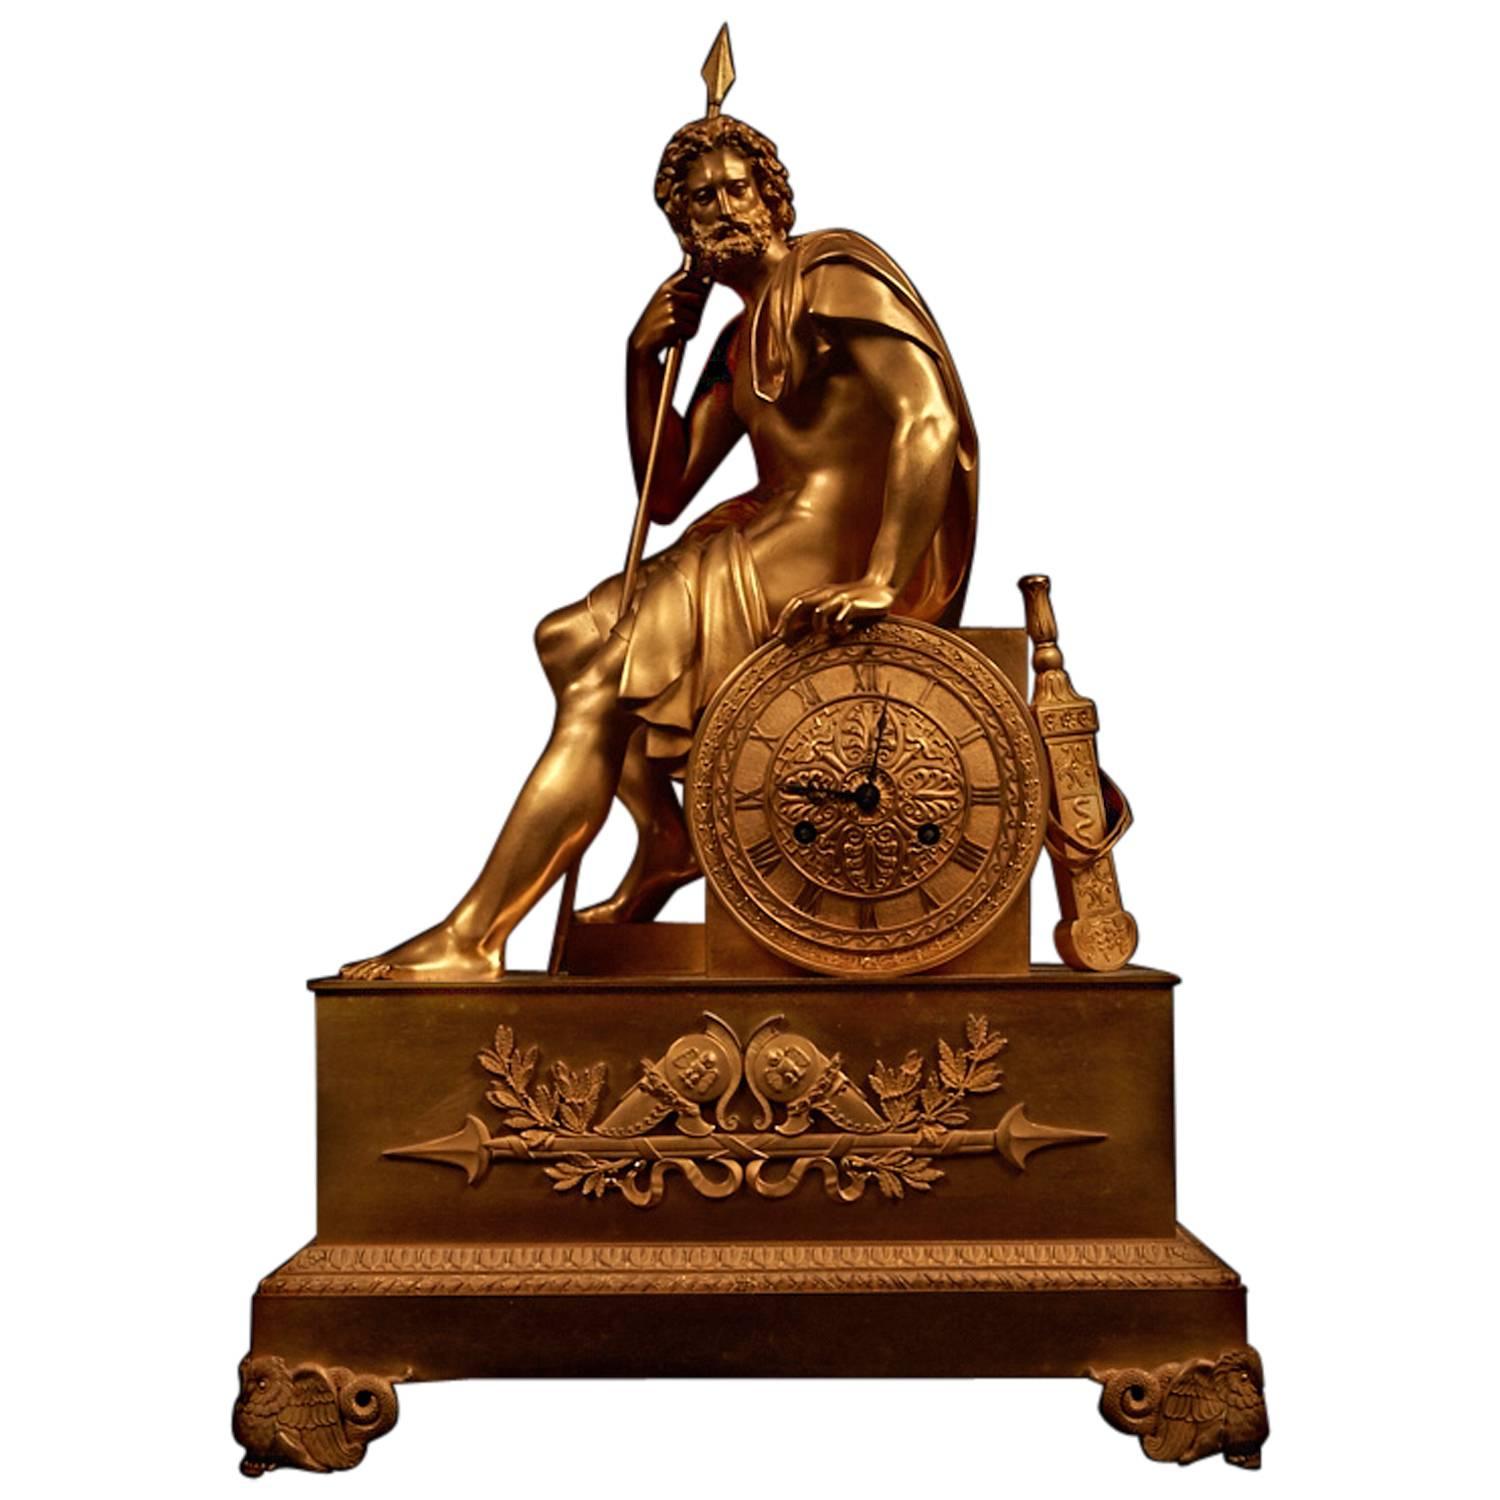 Large fire gilded Empire clock depicting a seated Ulysses, early 19th century